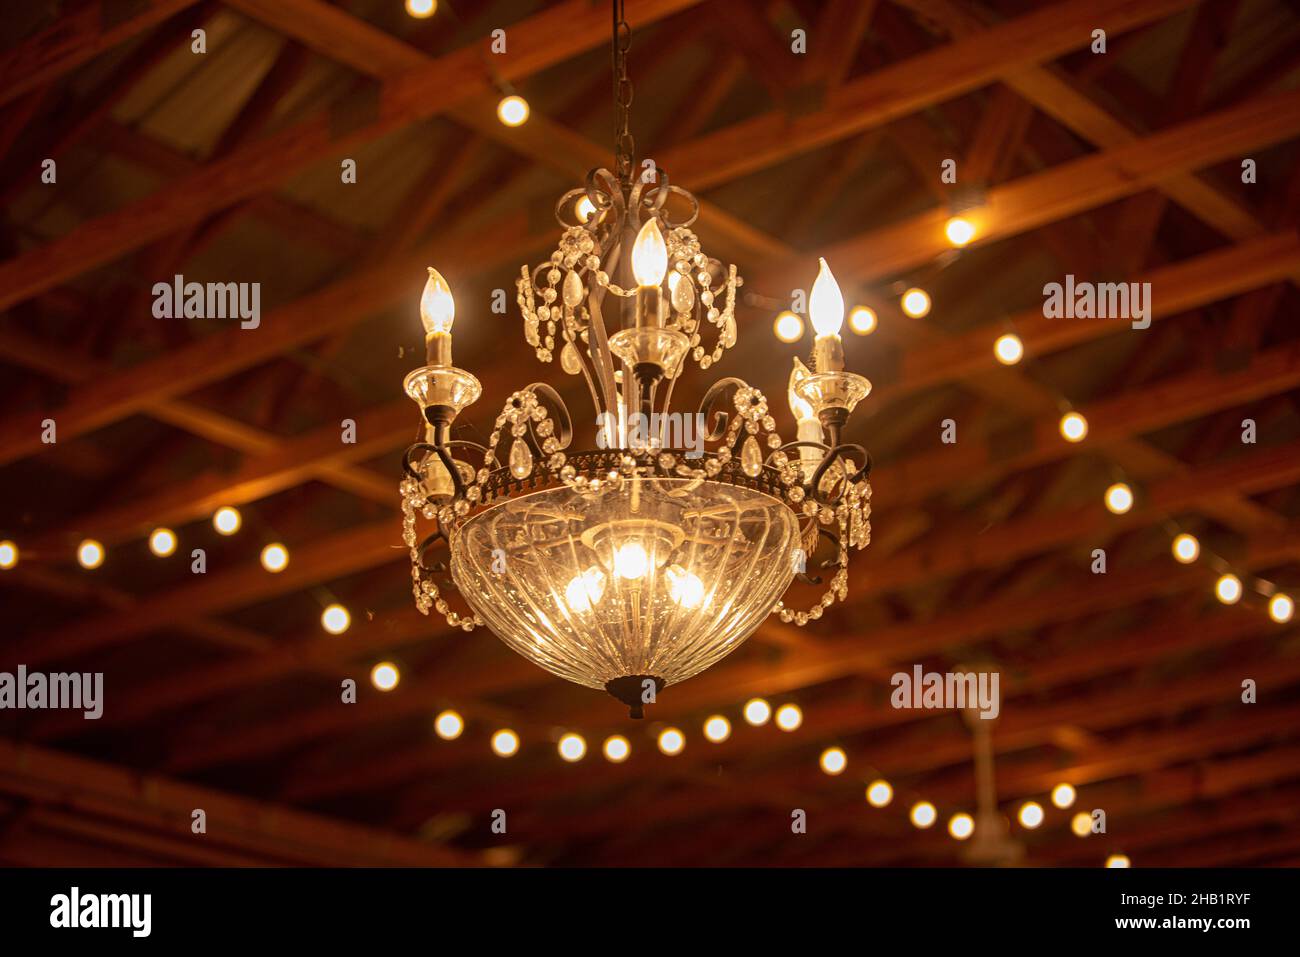 Warm victorian chandeleir hanging from wood beam ceiling in a barn Stock Photo